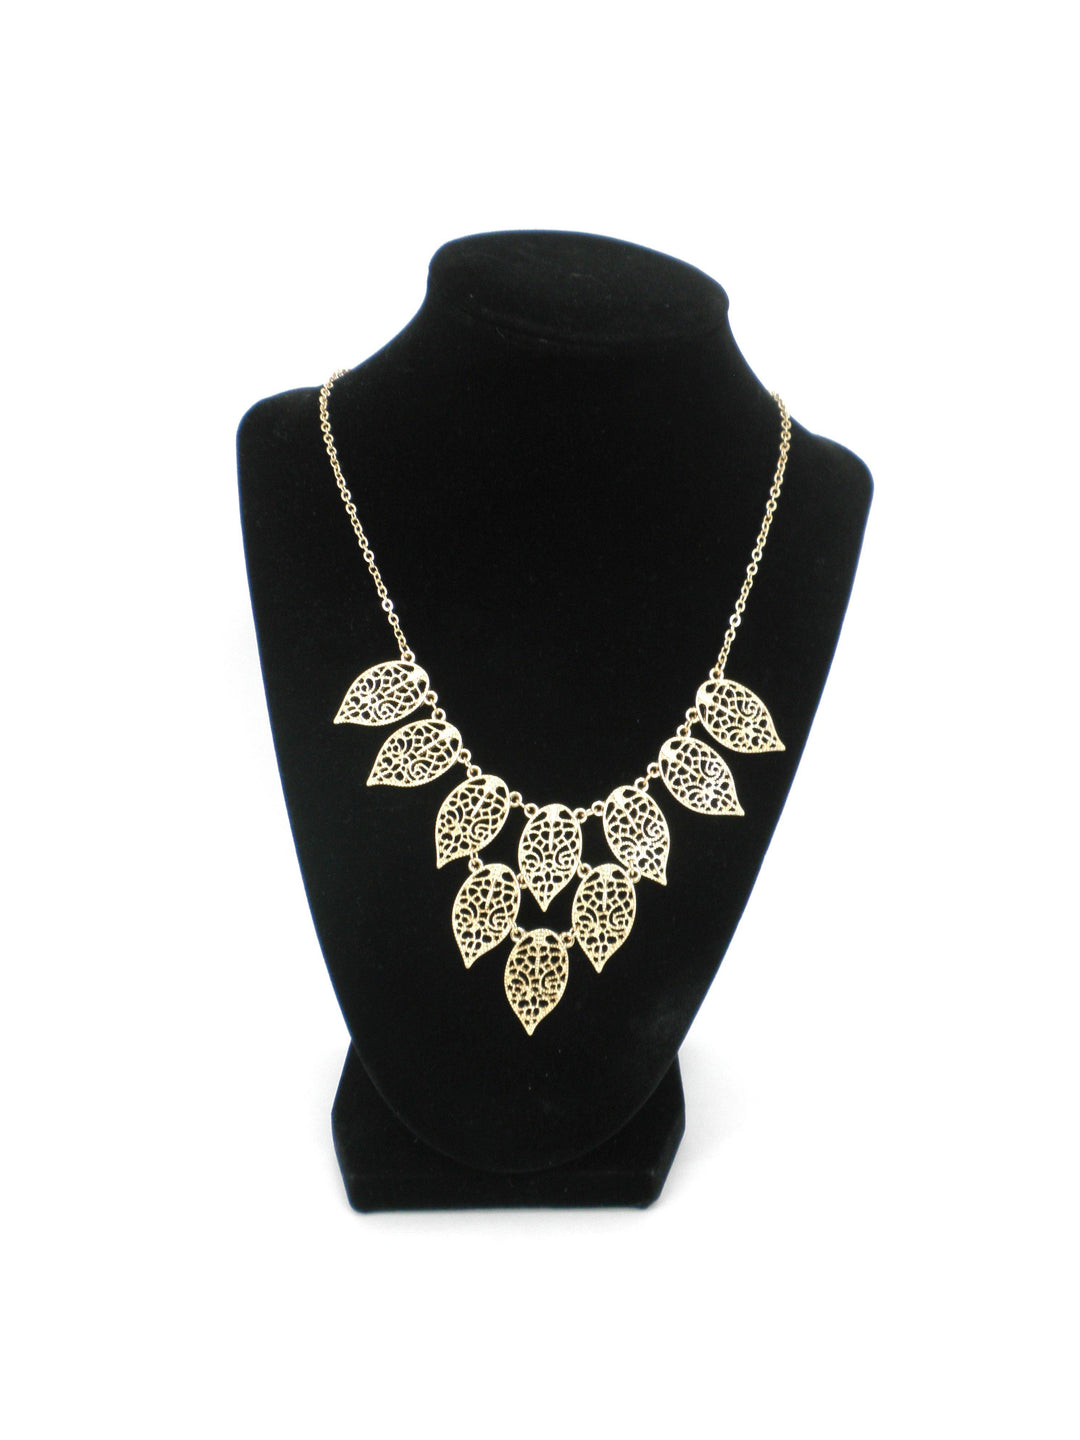 Gold Leaves Necklace - The Fashion Foundation - {{ discount designer}}